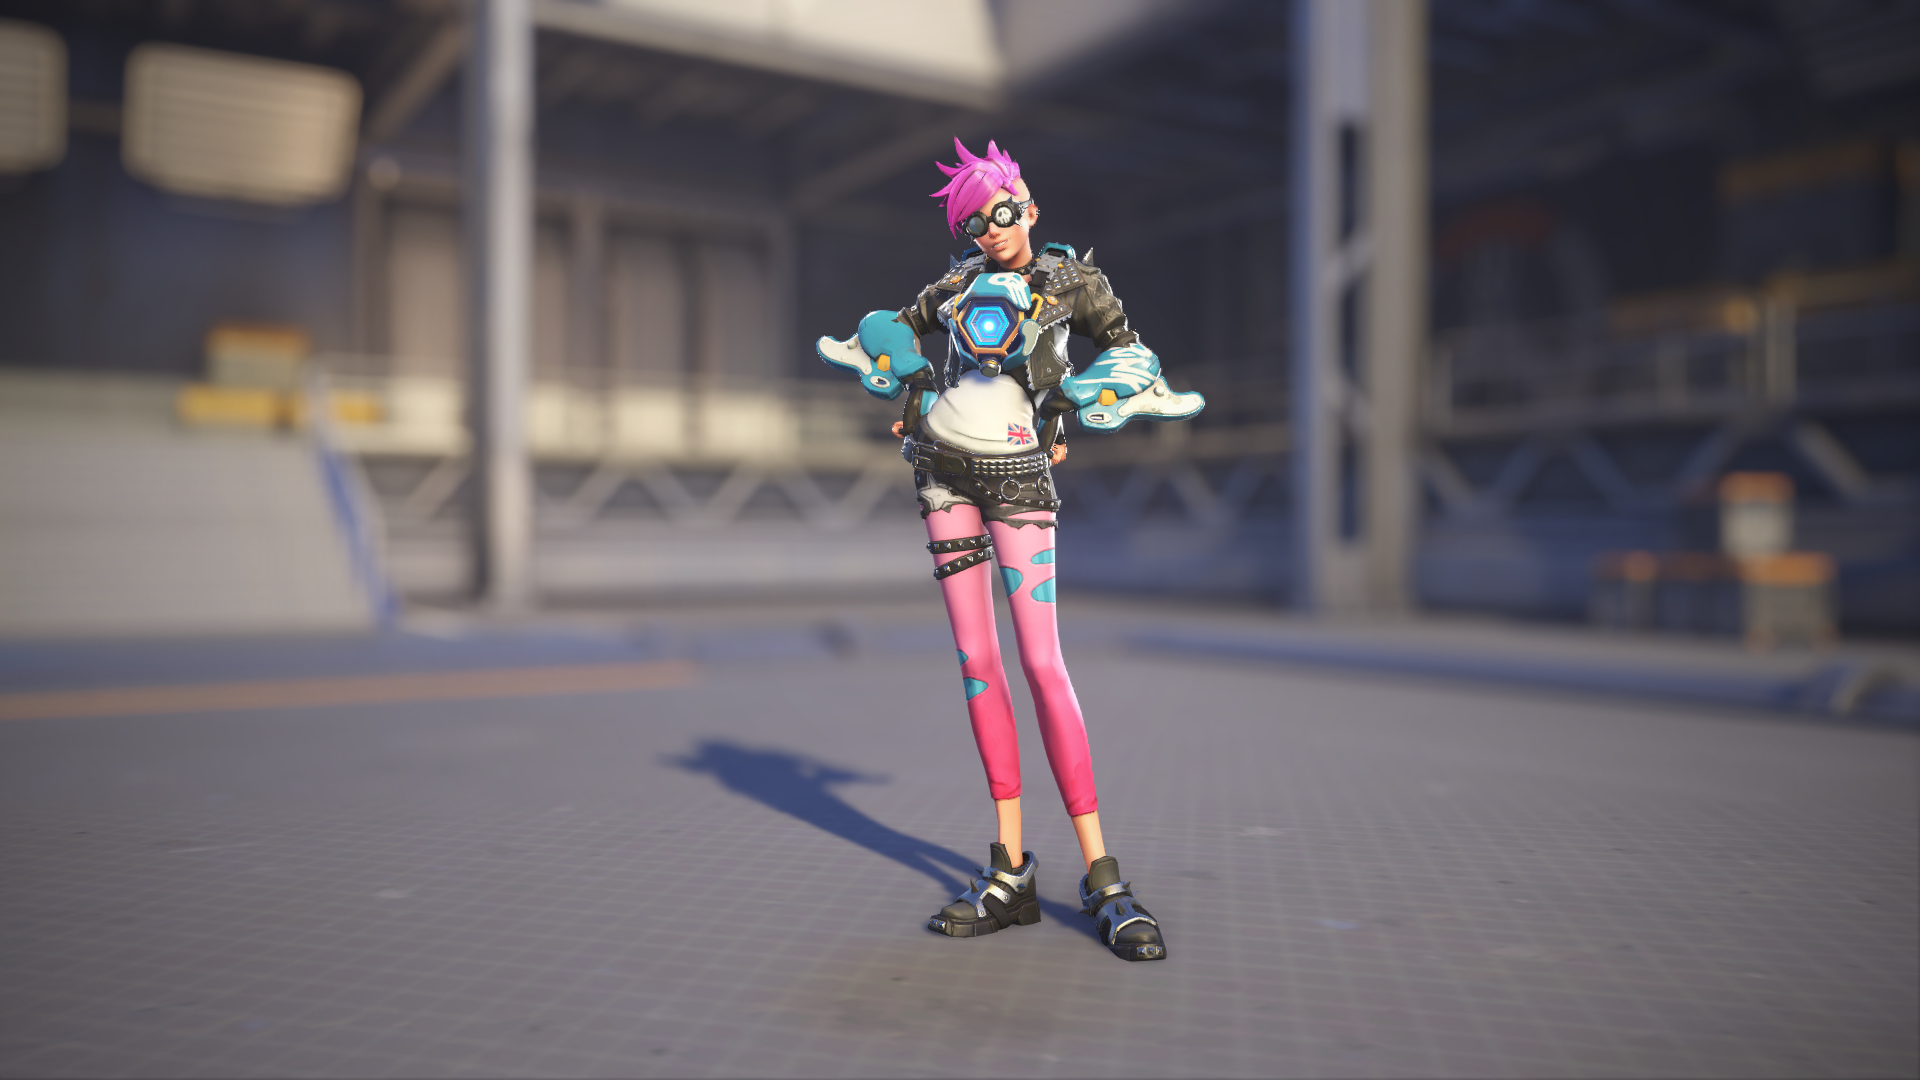 Tracer models her Punk skin in Overwatch 2.